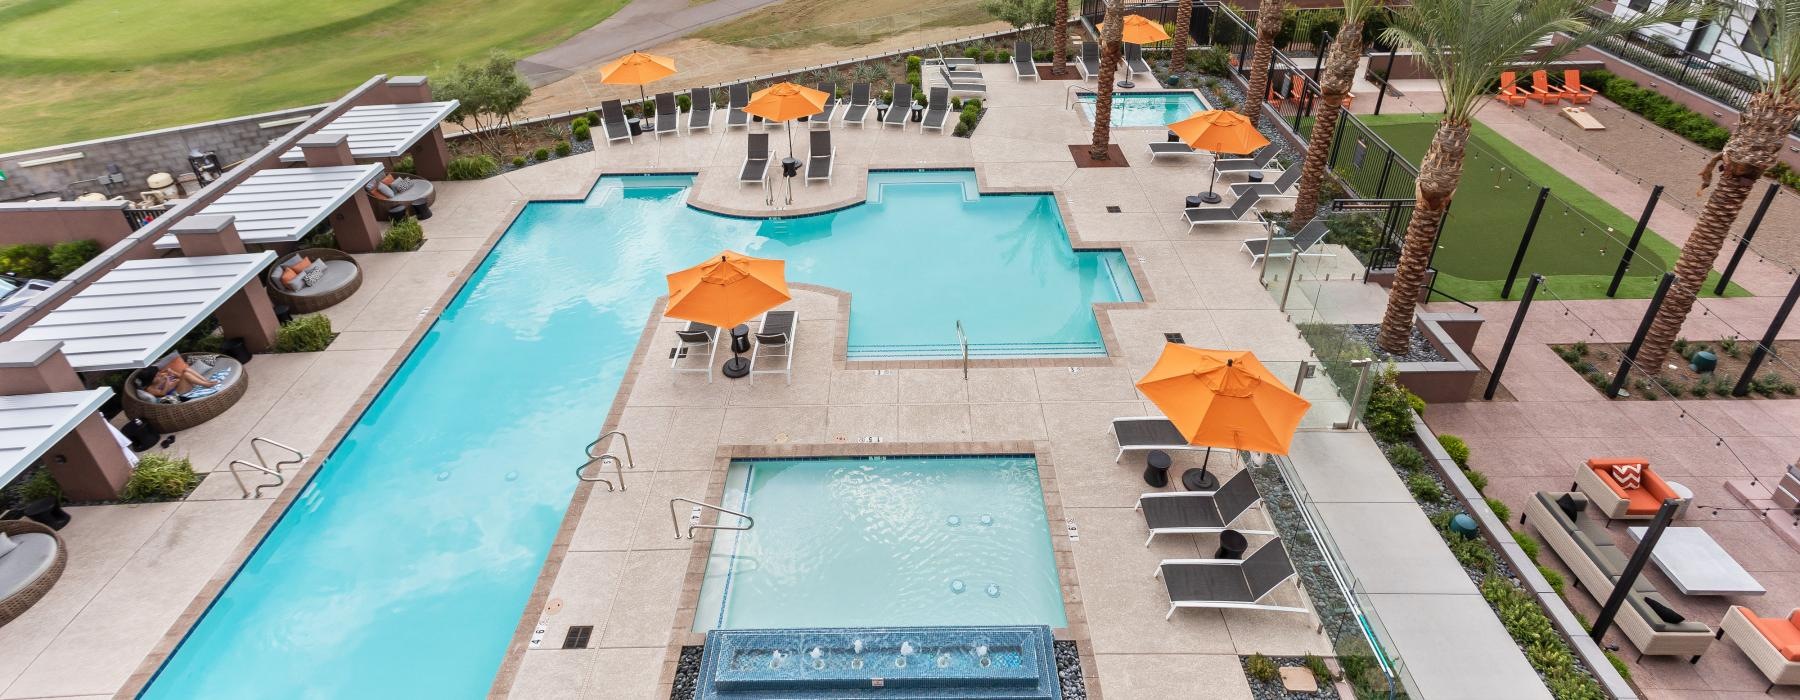 a pool with a lounge chair and umbrellas by a building